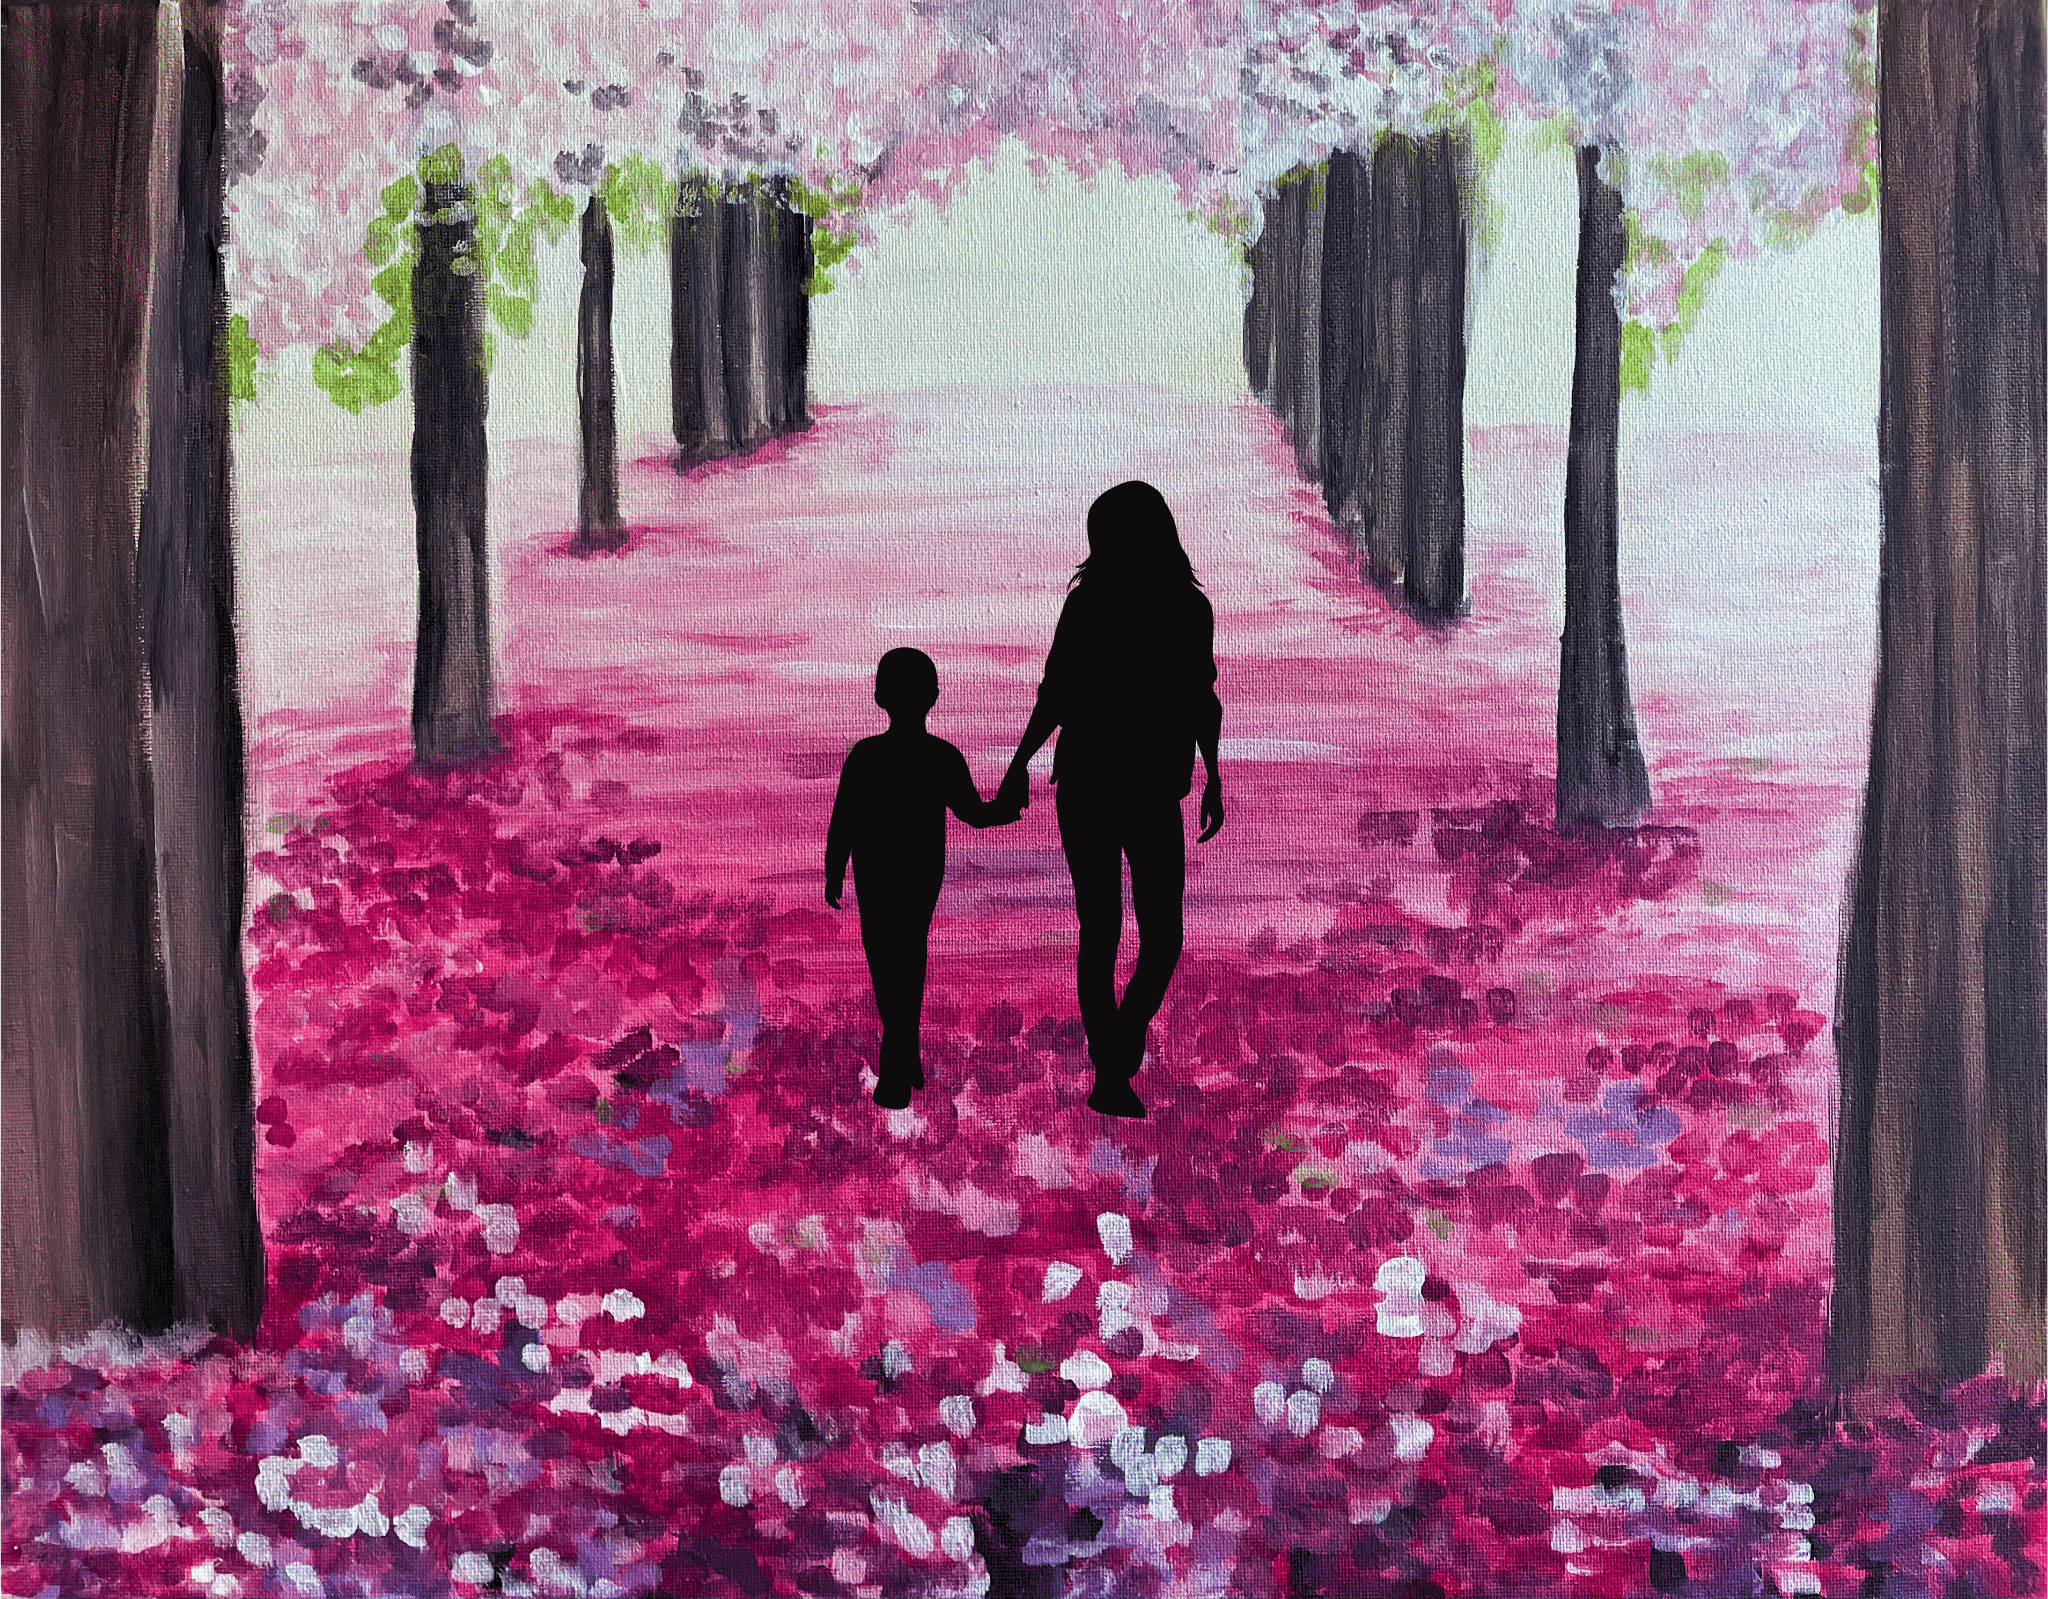 Mother's Day Paint and Sip